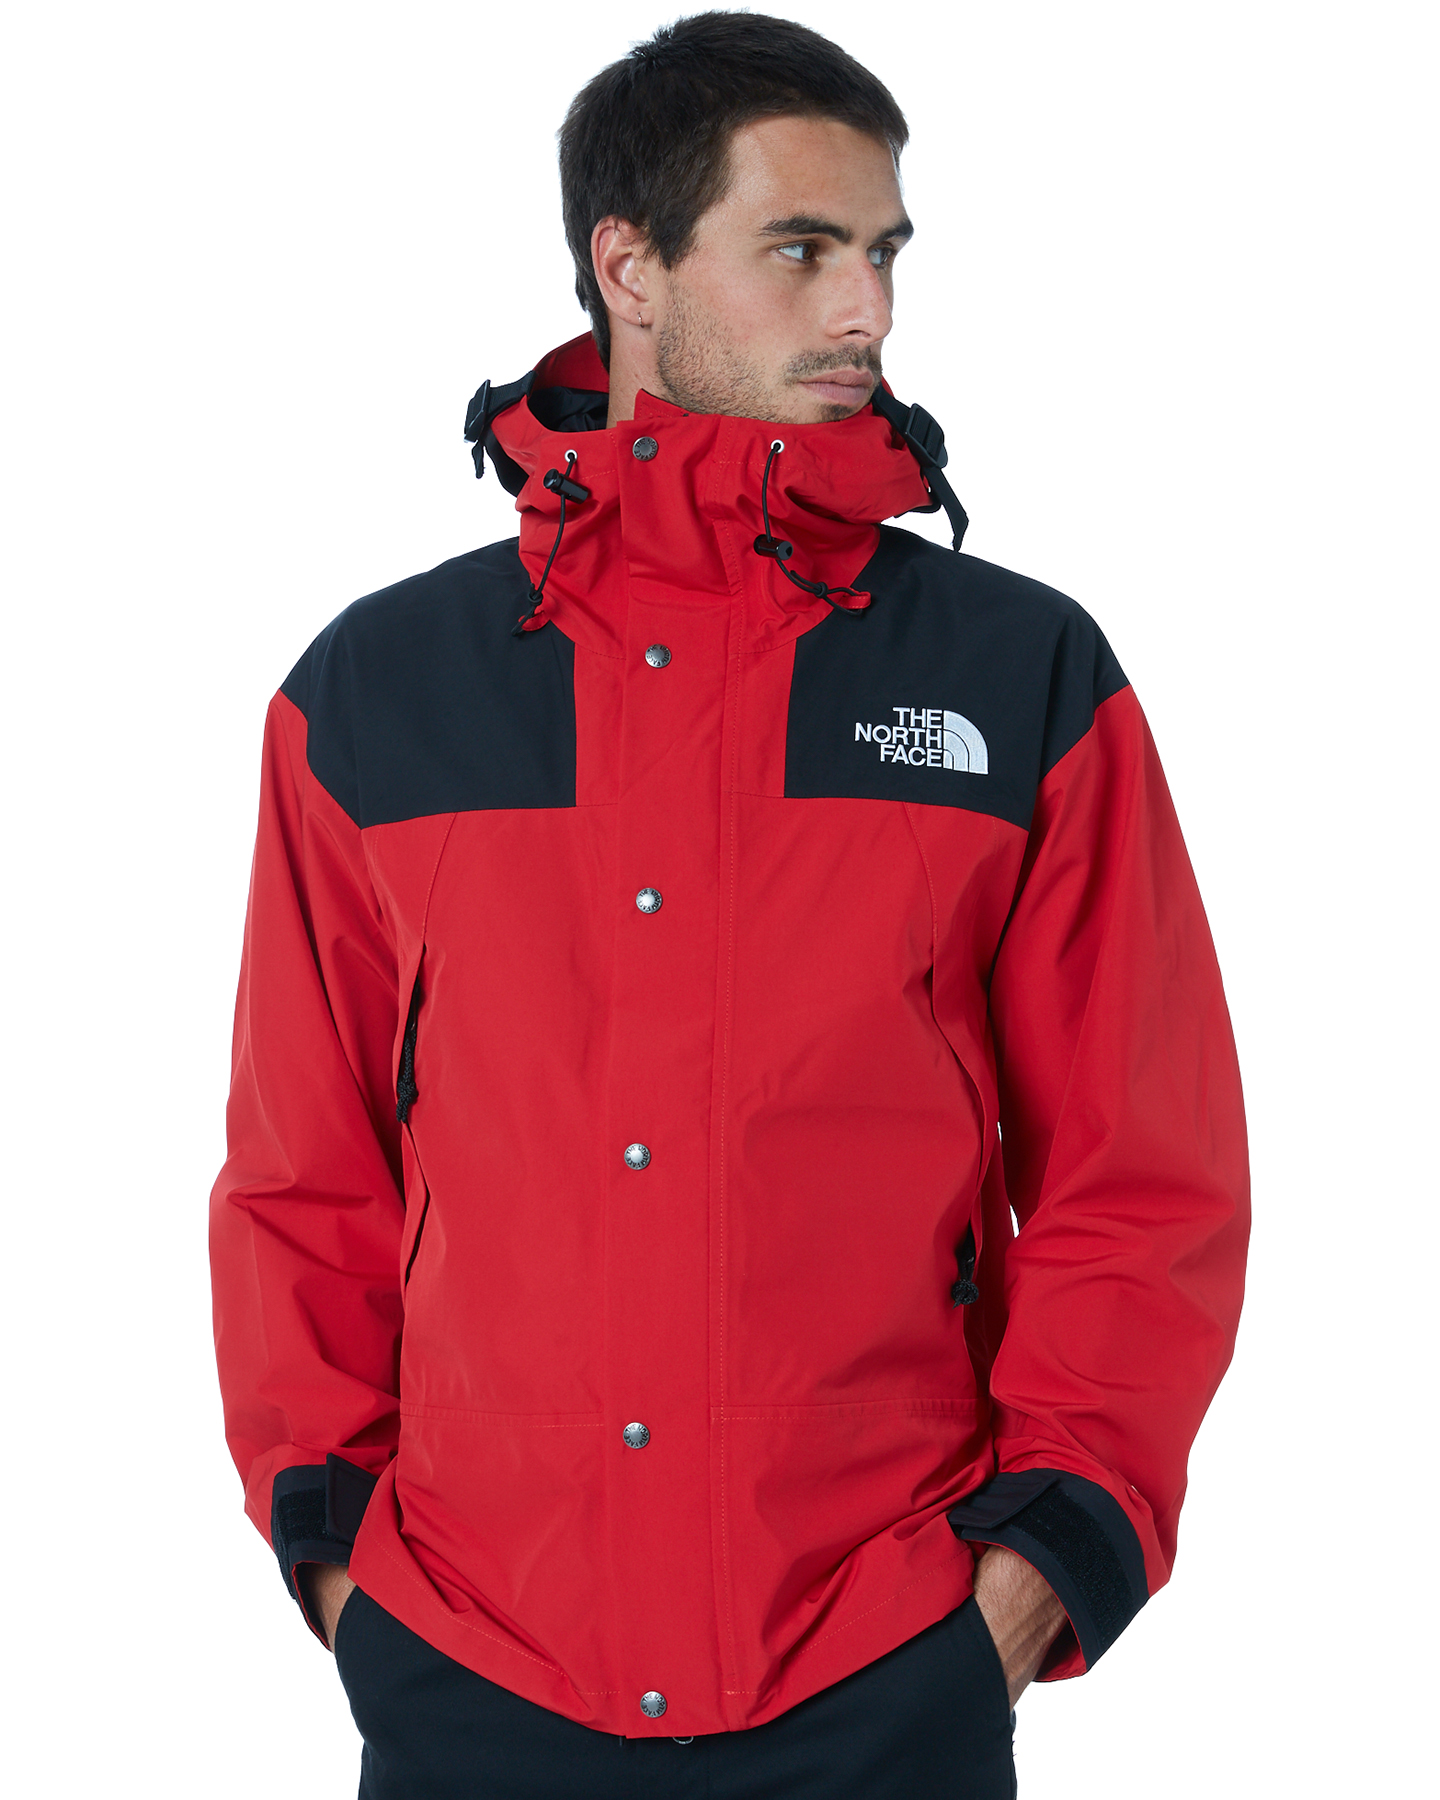 north face red mens jacket